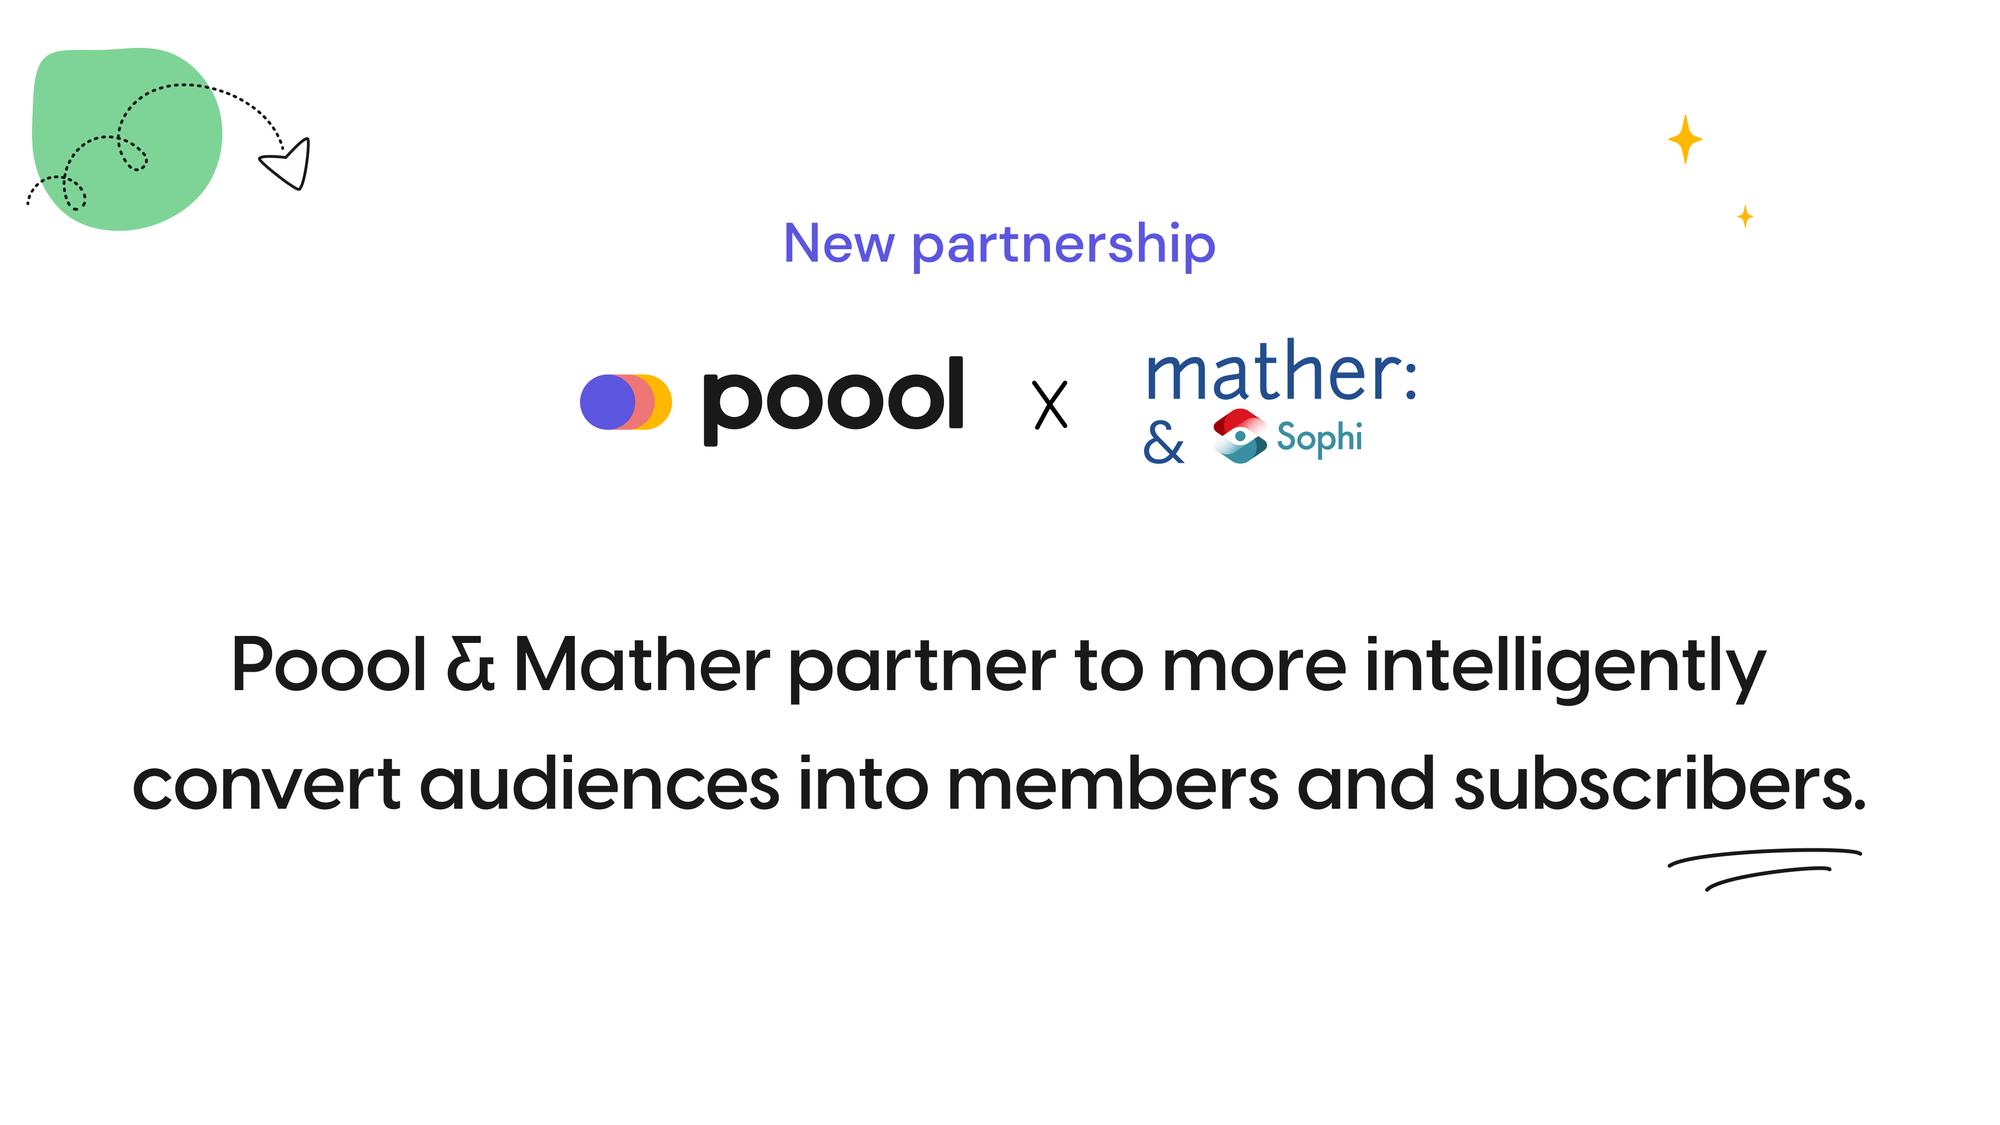 Poool & Mather Economics / Sophi.io partner to maximize audience conversion to subscription & membership